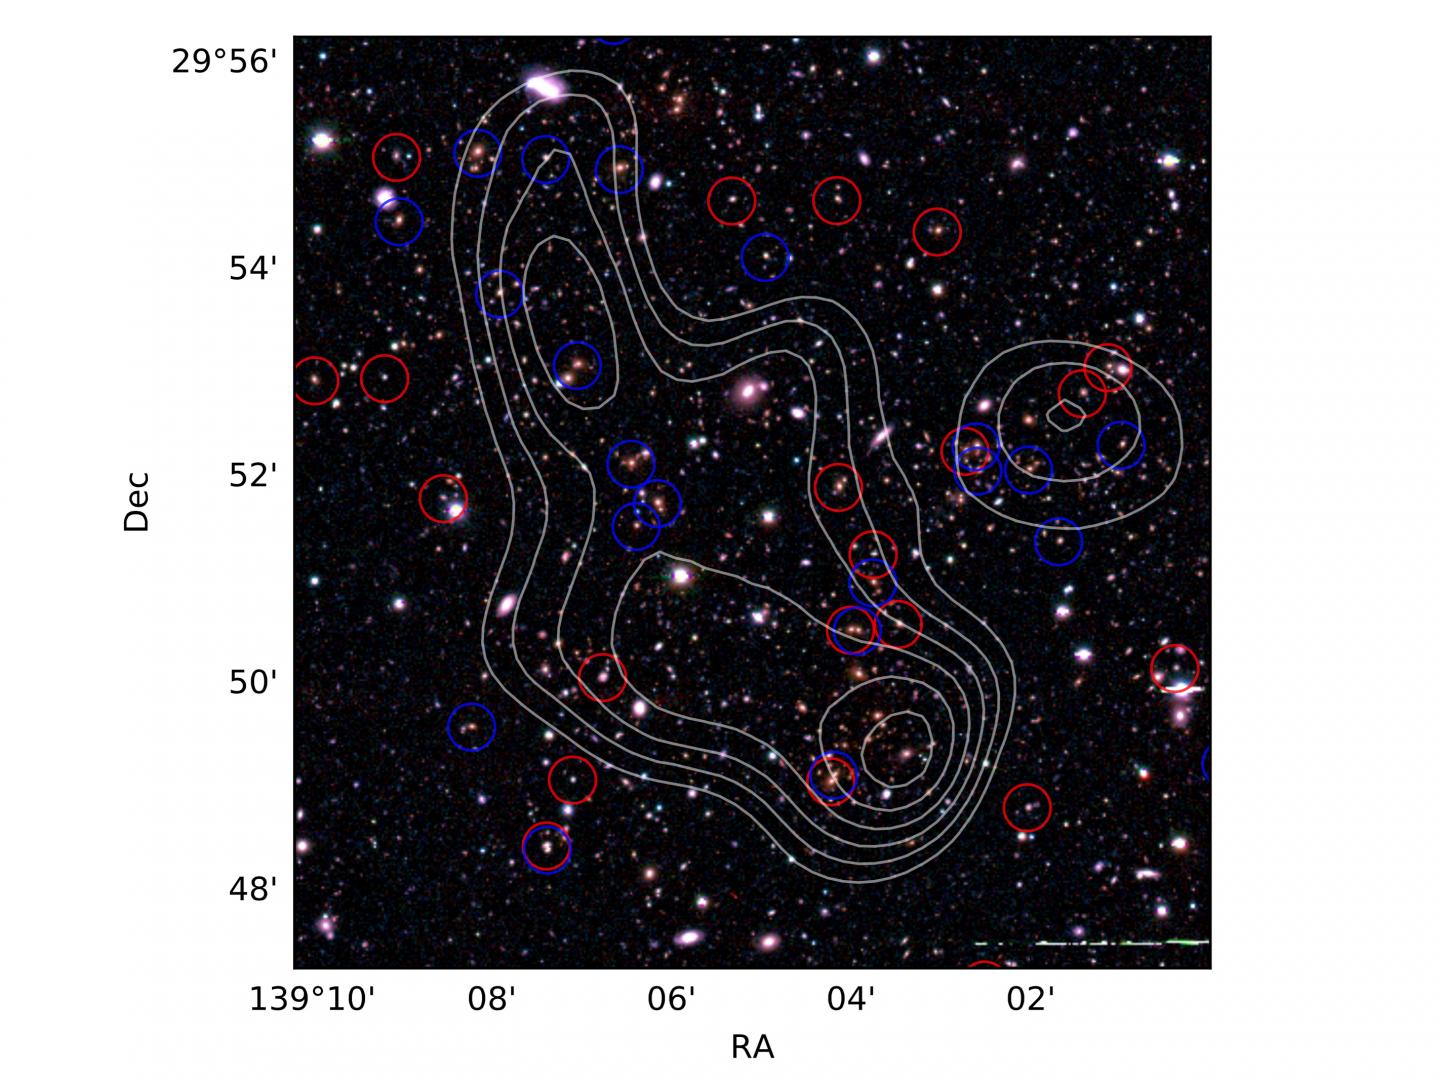 Figure 1: A Close-Up View of the Cluster of Galaxies Observed